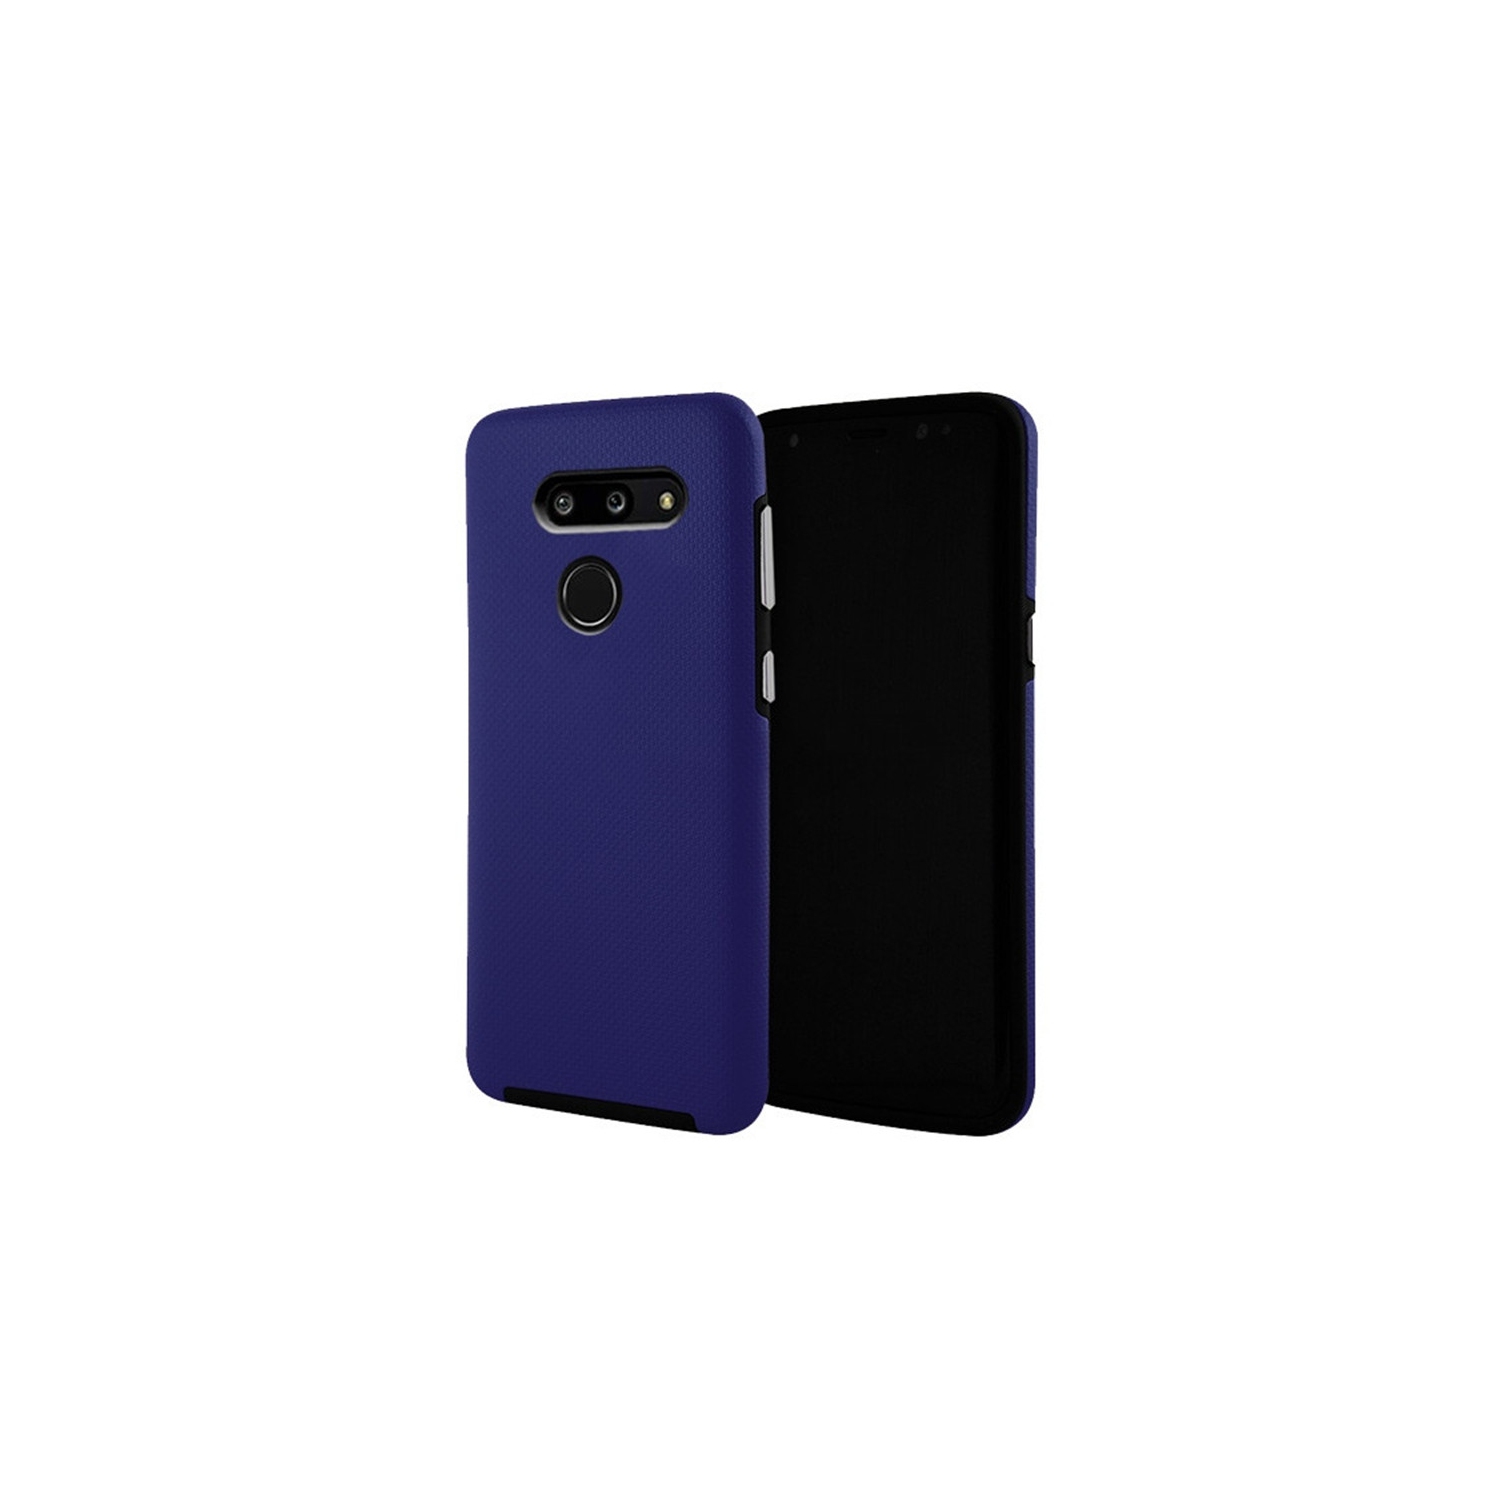 【CSmart】 Slim Fitted Hybrid Hard PC Shell Shockproof Scratch Resistant Case Cover for LG G8, Navy